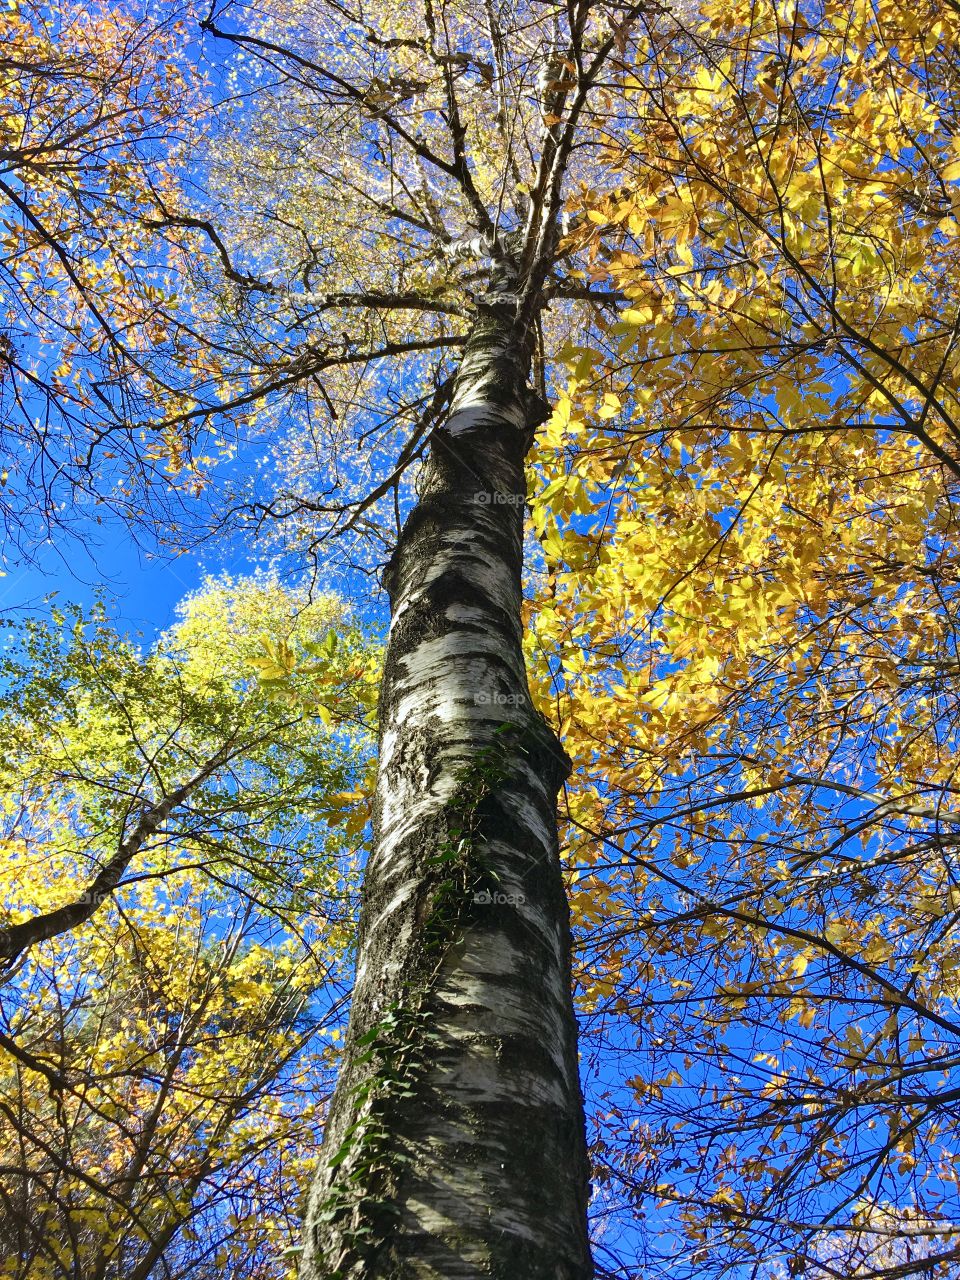 spectacular birch in autumn dress in the woods